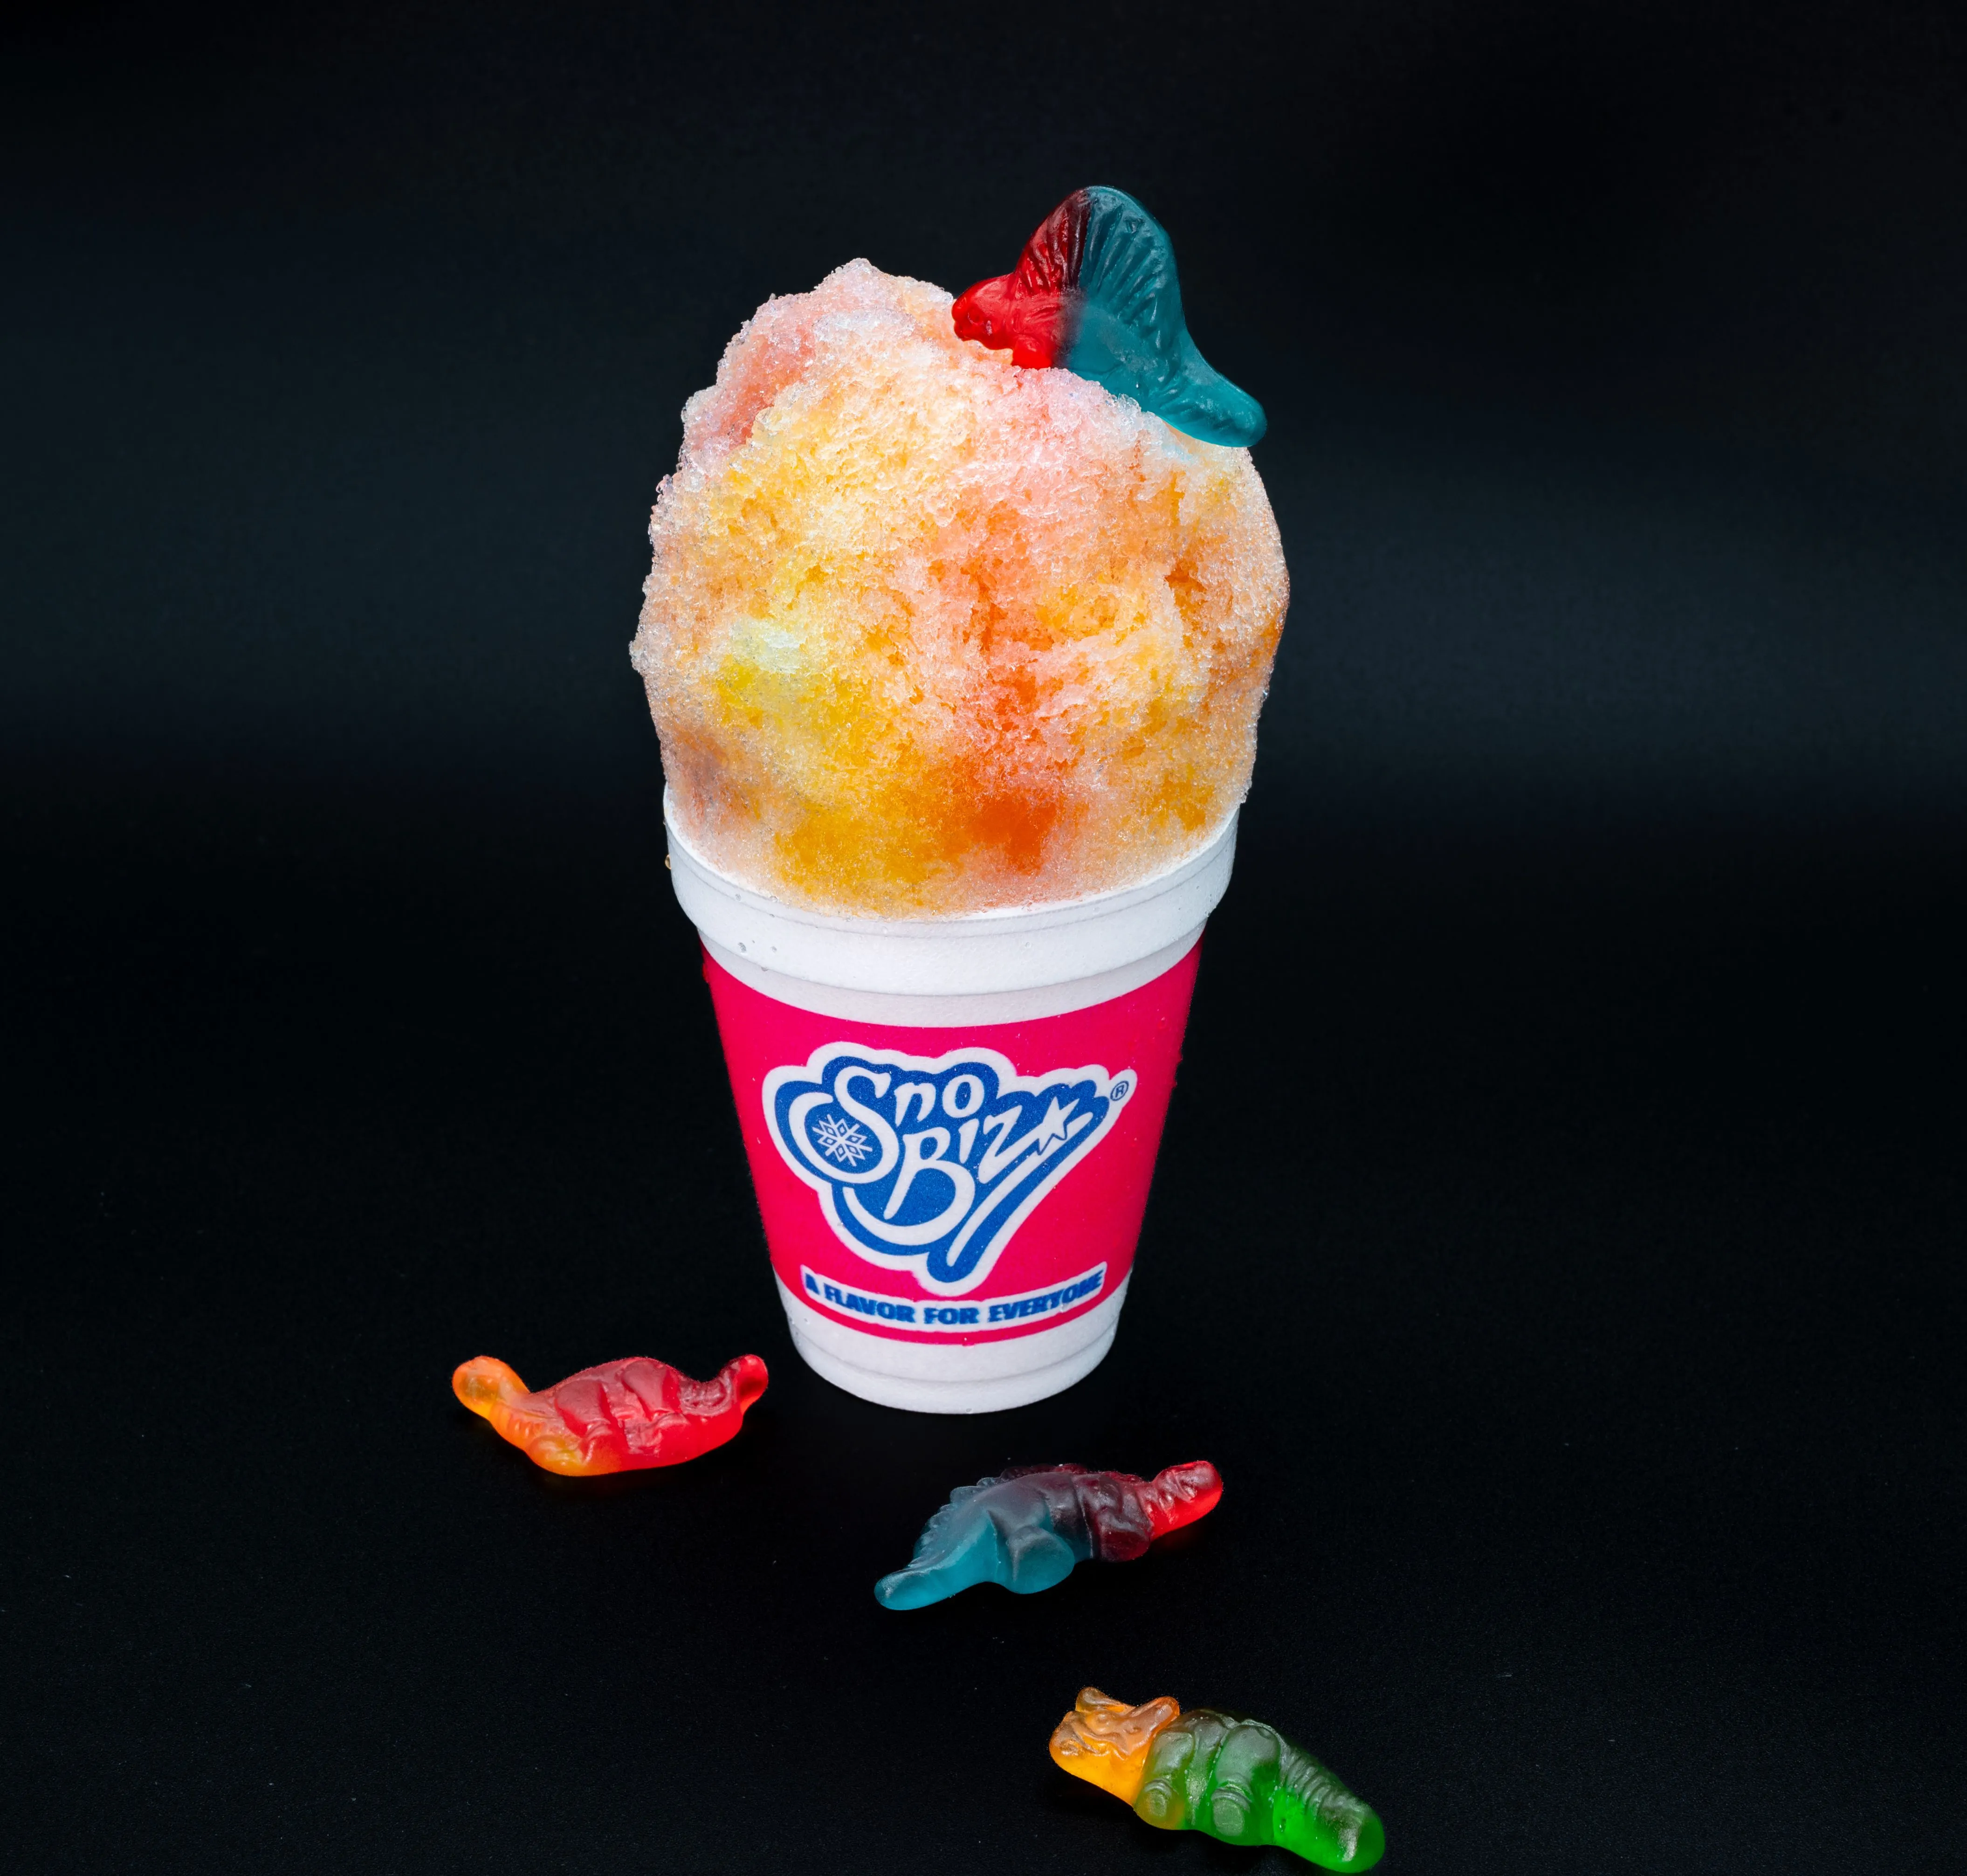 Colorful shaved ice in a Sno Biz cup topped with a gummy shark, surrounded by more gummy candies on a black background.